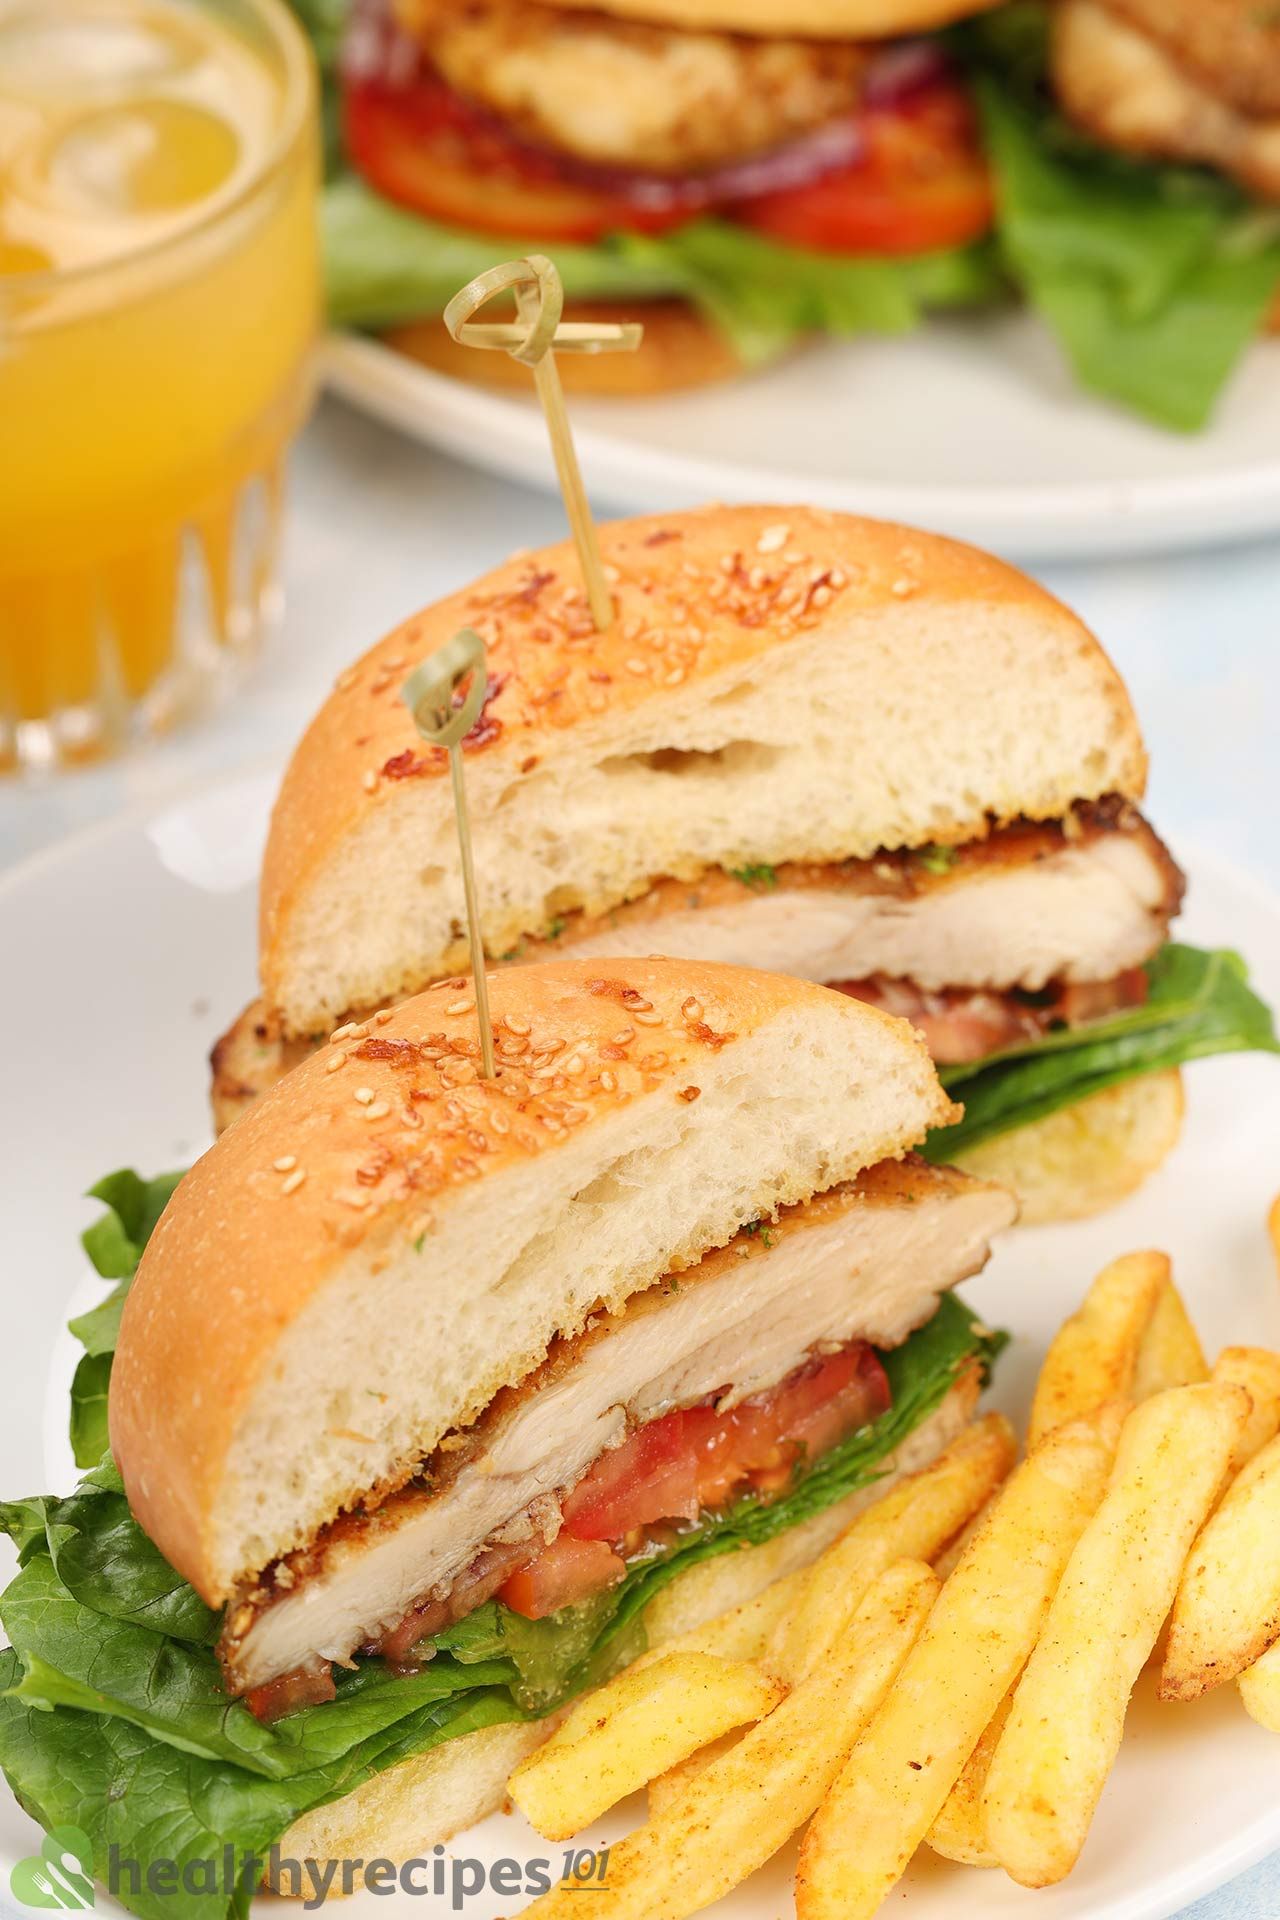 What to Serve With Our Air Fryer Chicken Burger